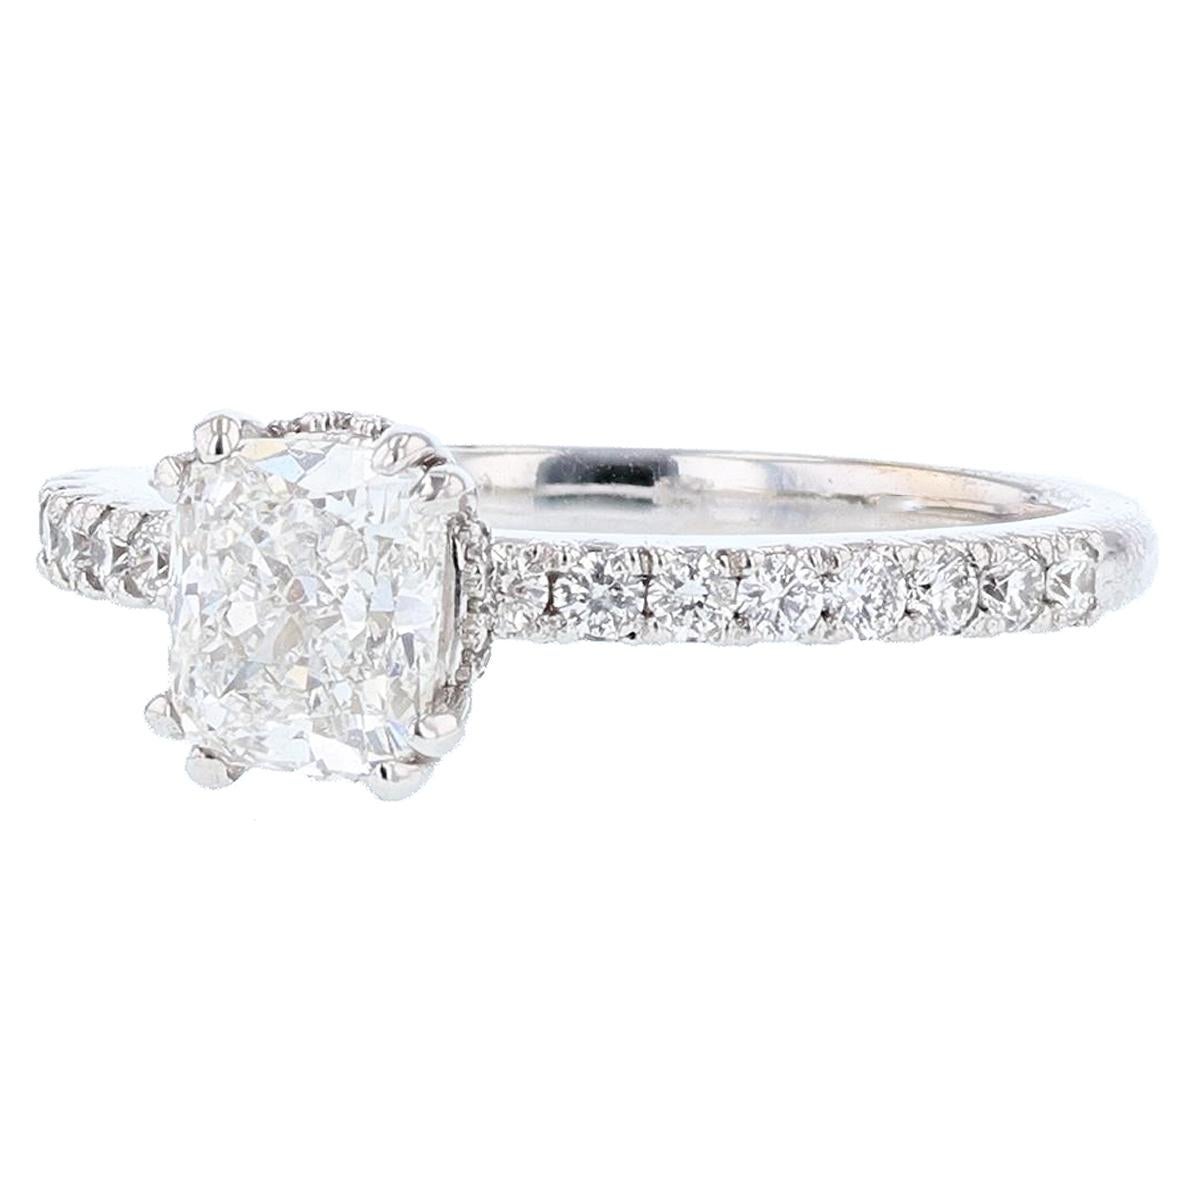 This ring is made in platinum and 18K white gold. The center diamond is a 1.02ct GIA certified cushion cut diamond with a color grade (F) and clarity grade (IF) clarity. The certificate number is 